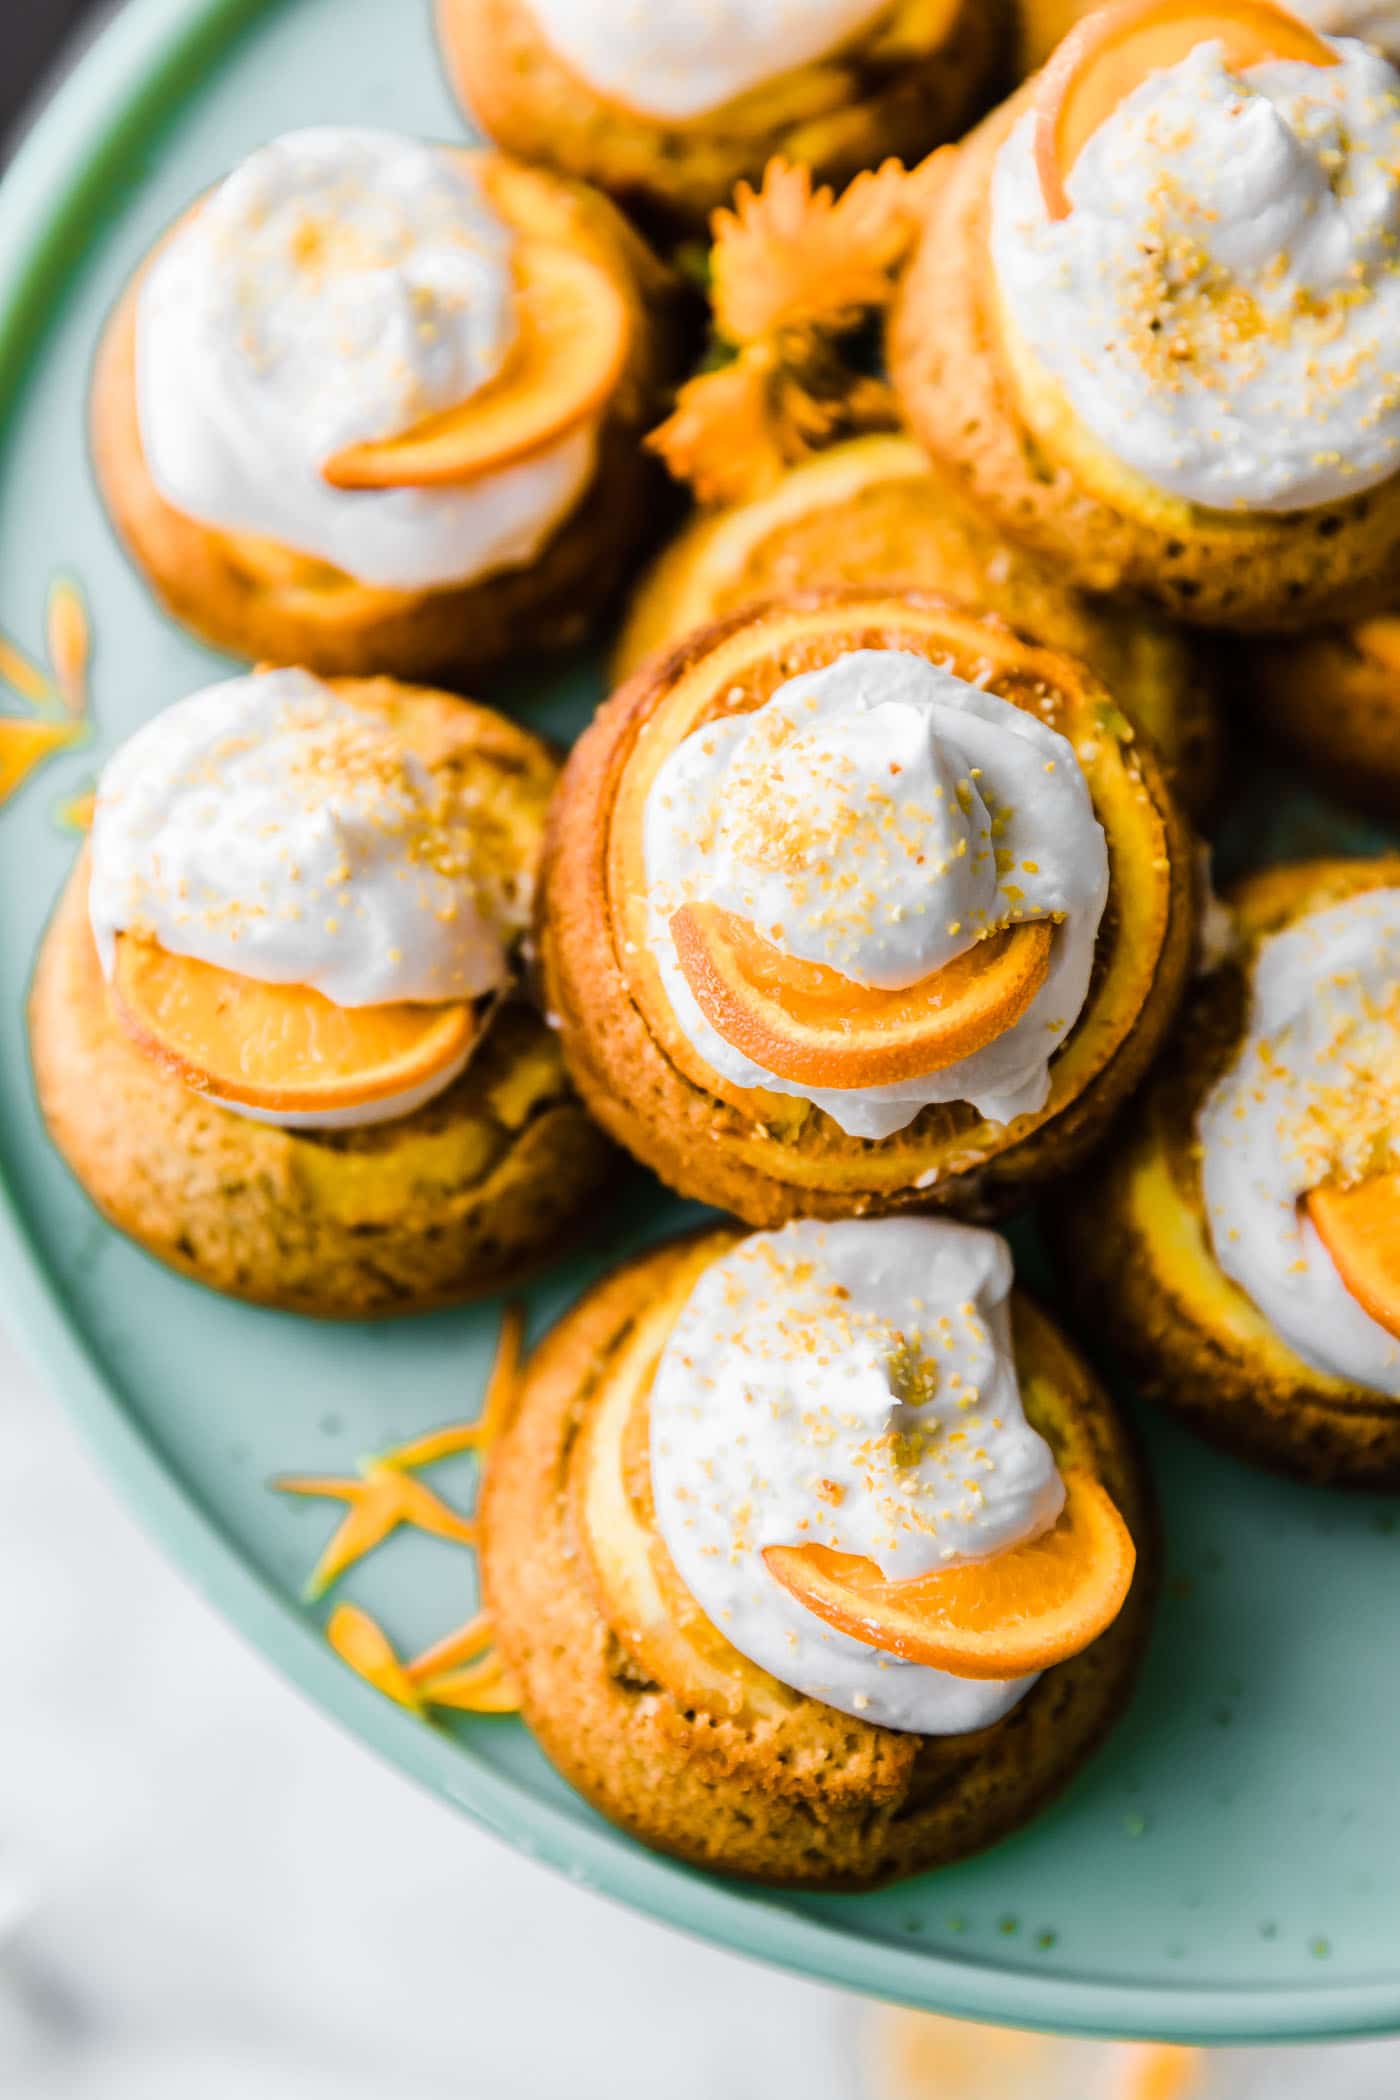 Upside down mini orange cream cakes topped with whipped cream and thinly sliced oranges.